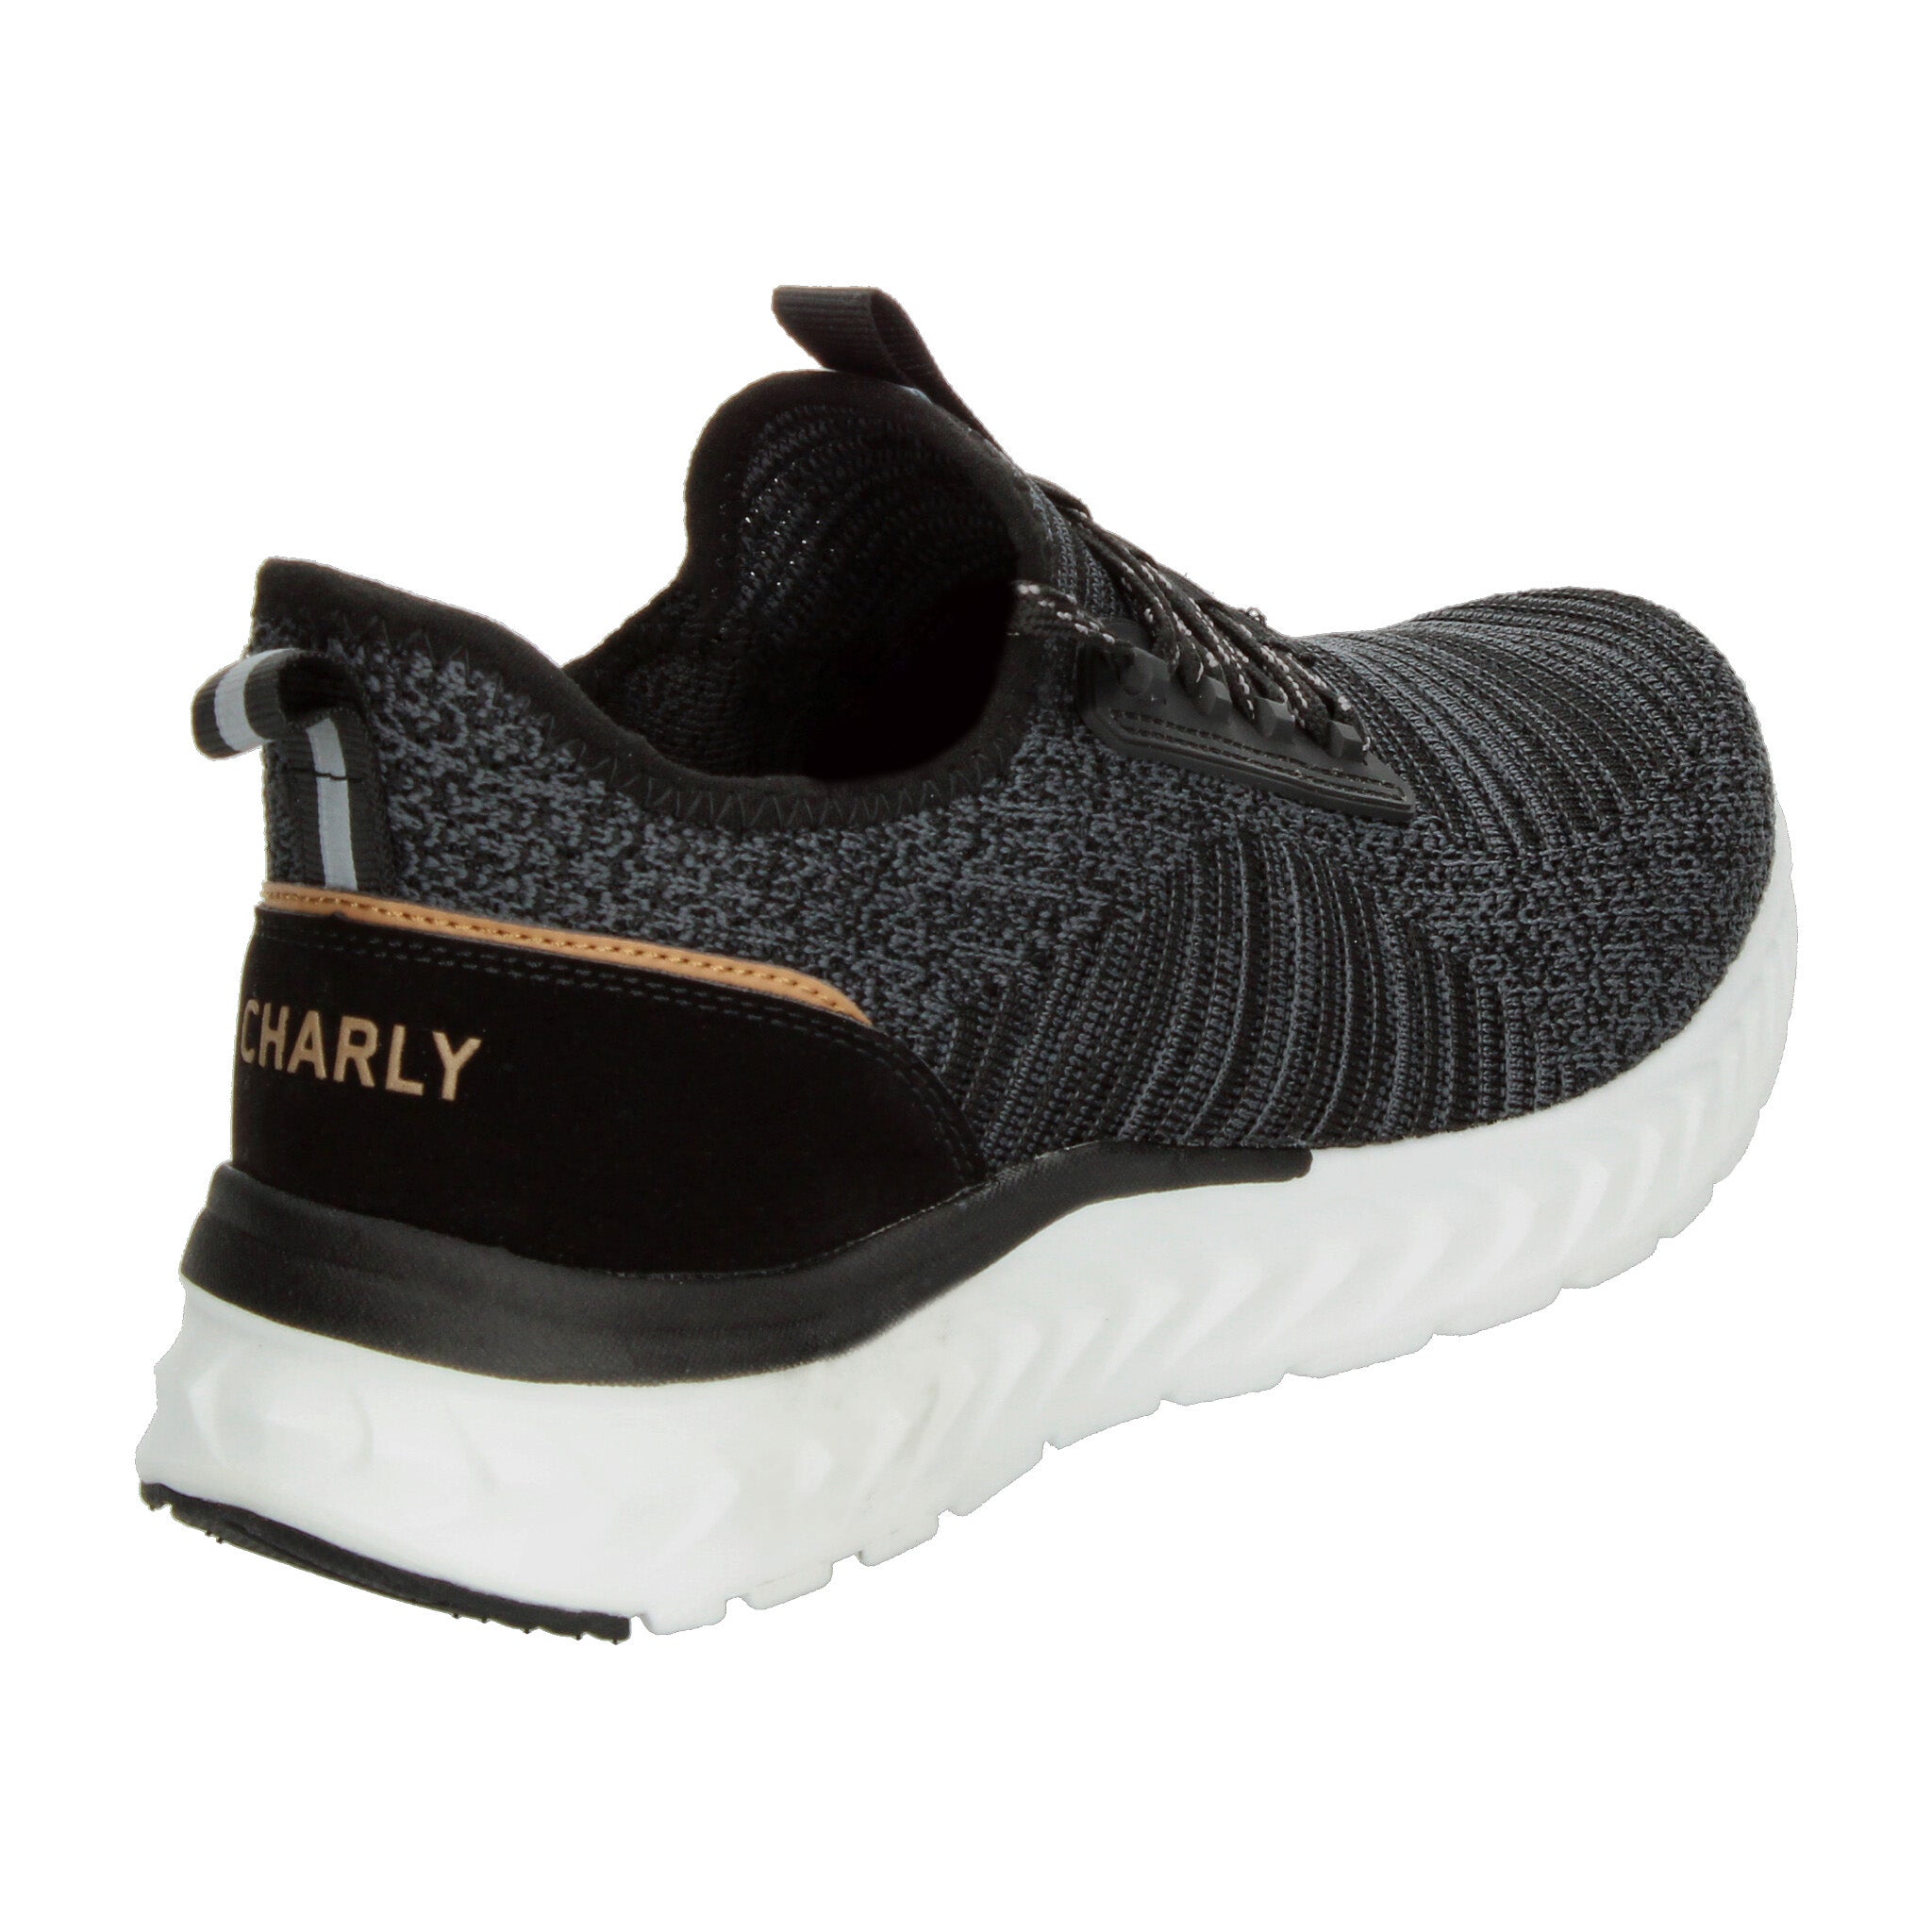 Tenis Charly Negro para Hombre [CHY3475] CHARLY 